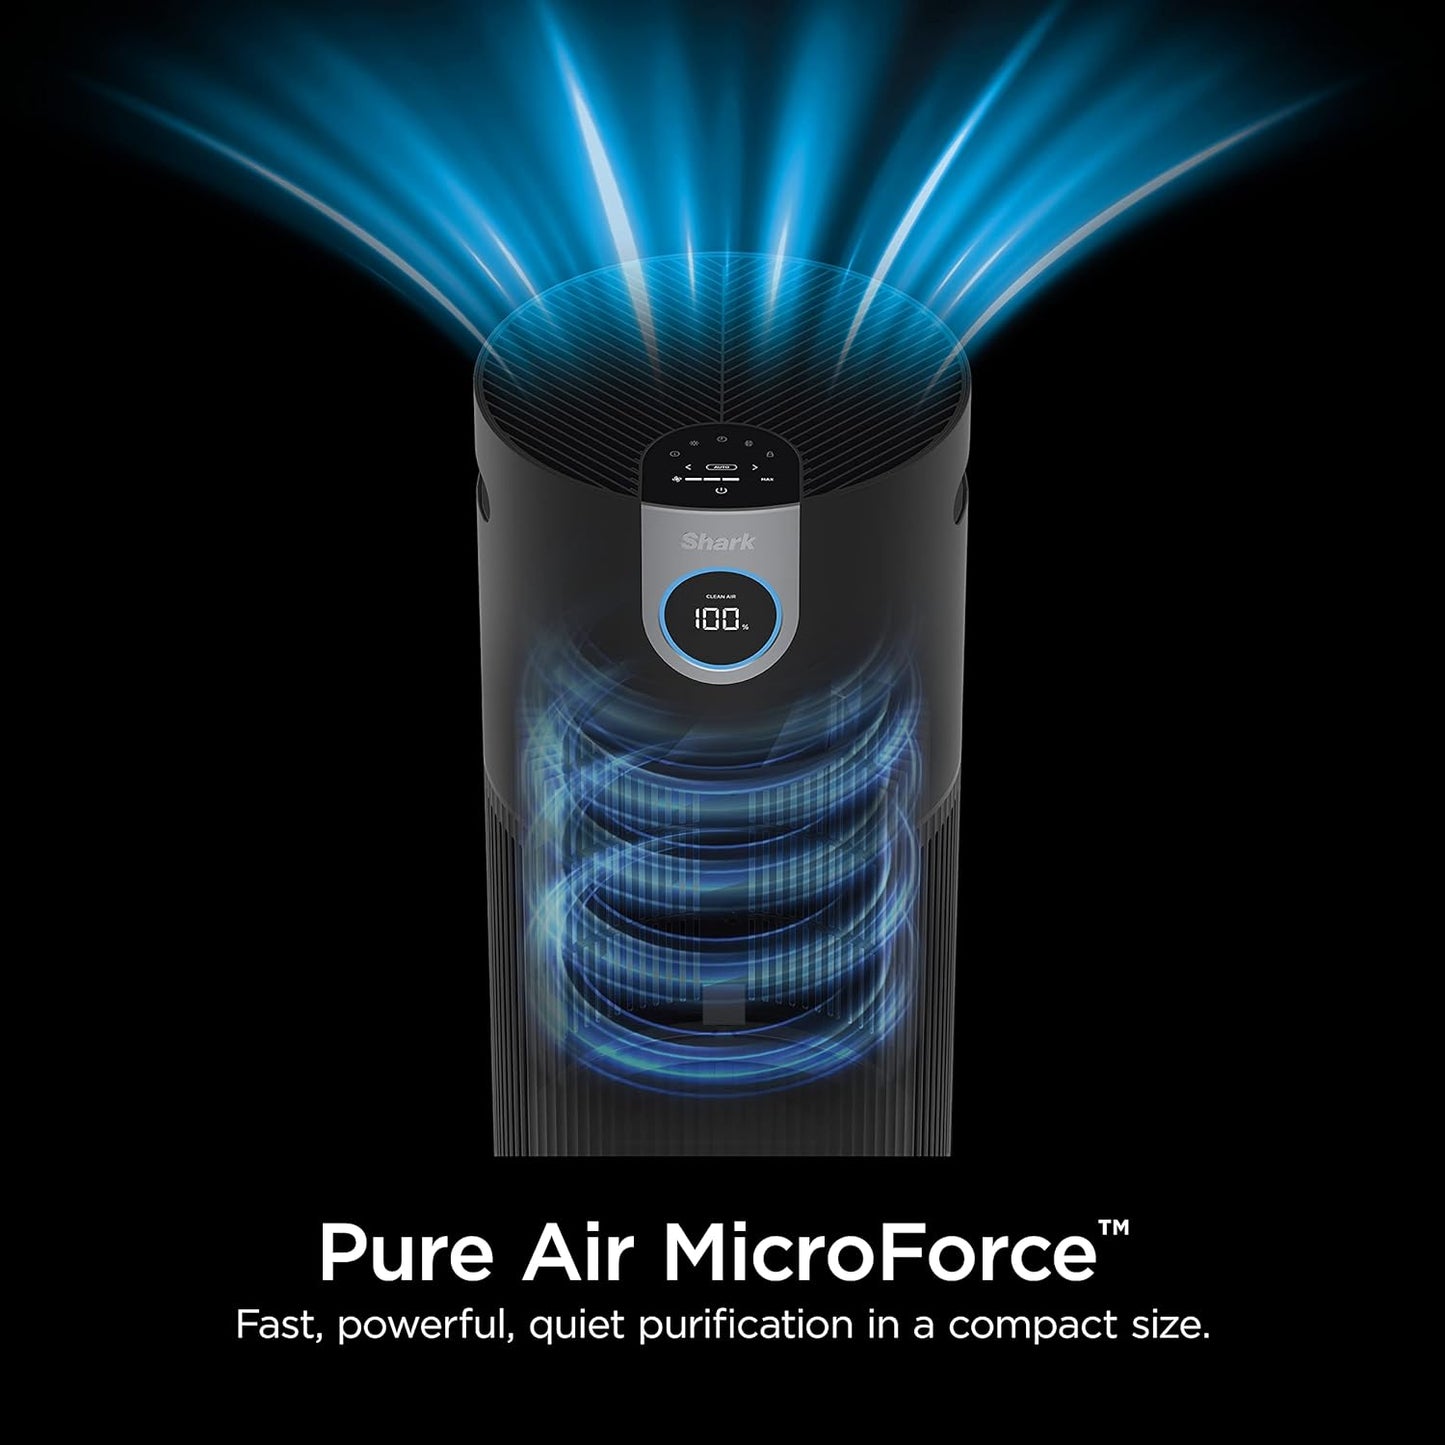 Shark Air Purifier MAX with NanoSeal HEPA, Cleansense IQ, Odor Lock, Cleans up to 1200 Sq. Ft. and 99.98% of particles, dust, allergens, smoke, 0.1–0.2 microns, Grey, HP202 (Renewed)